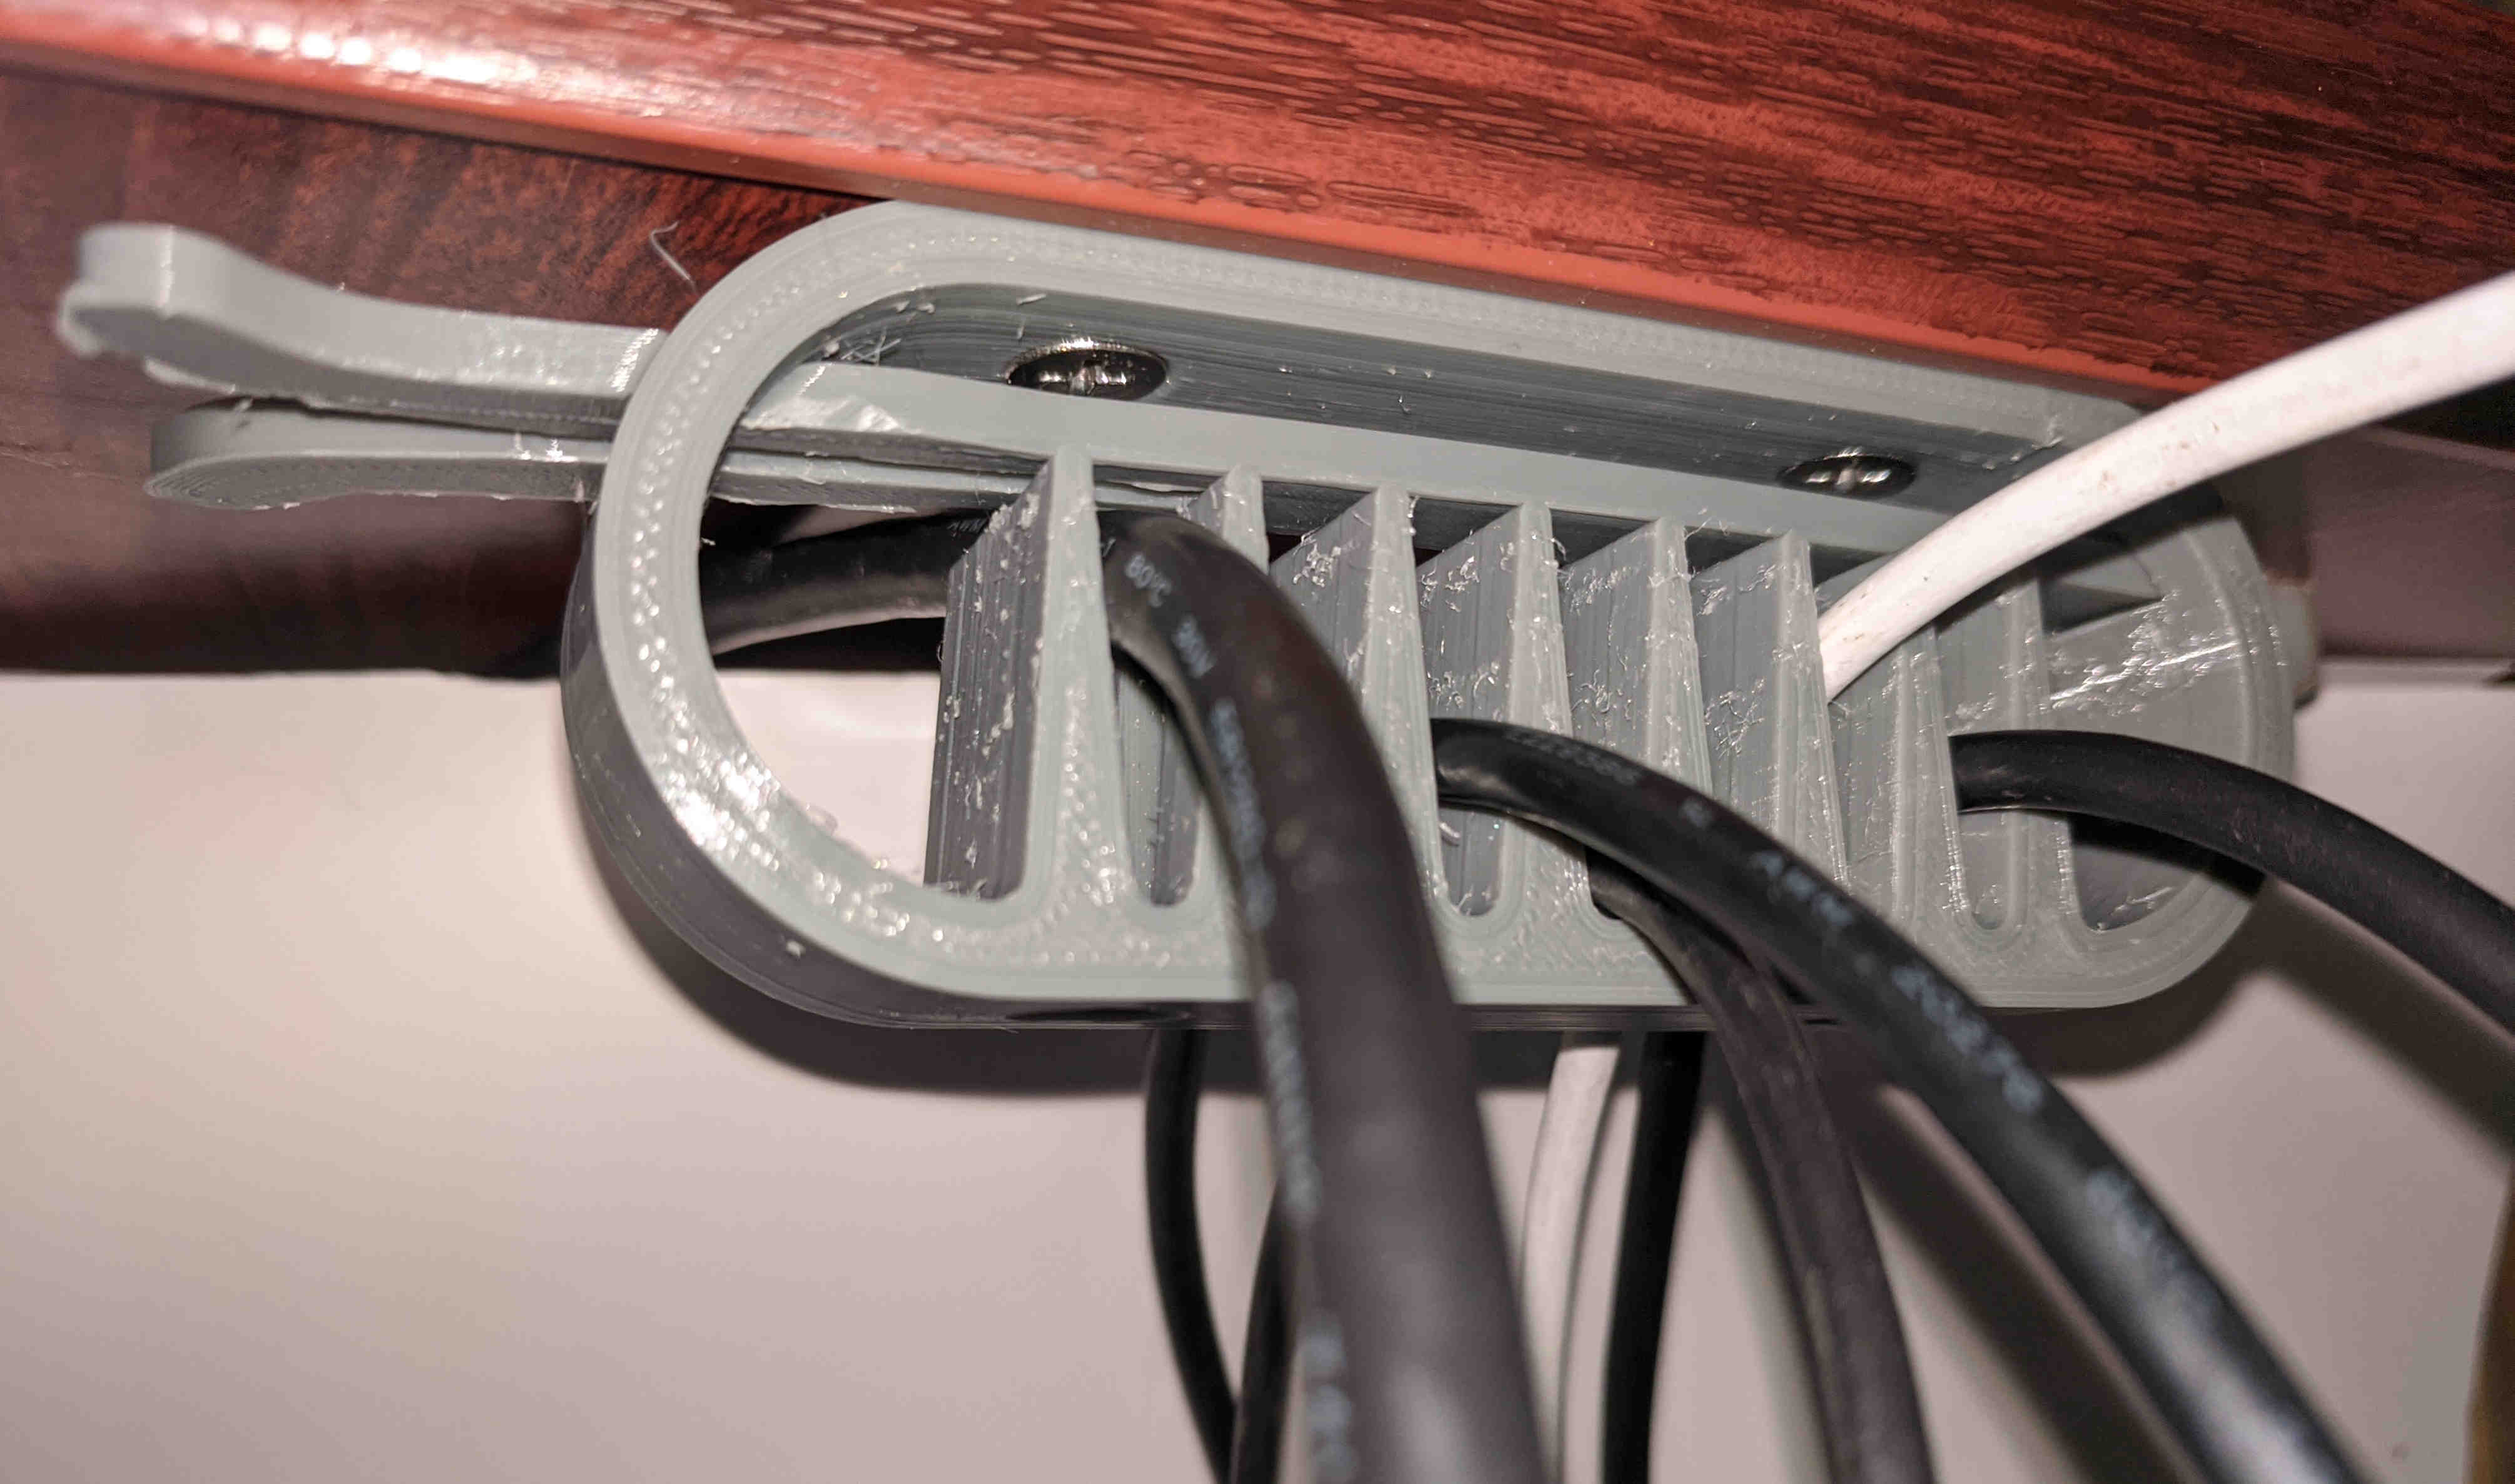 Under Desk Cable Management with Cable Lock by steriku